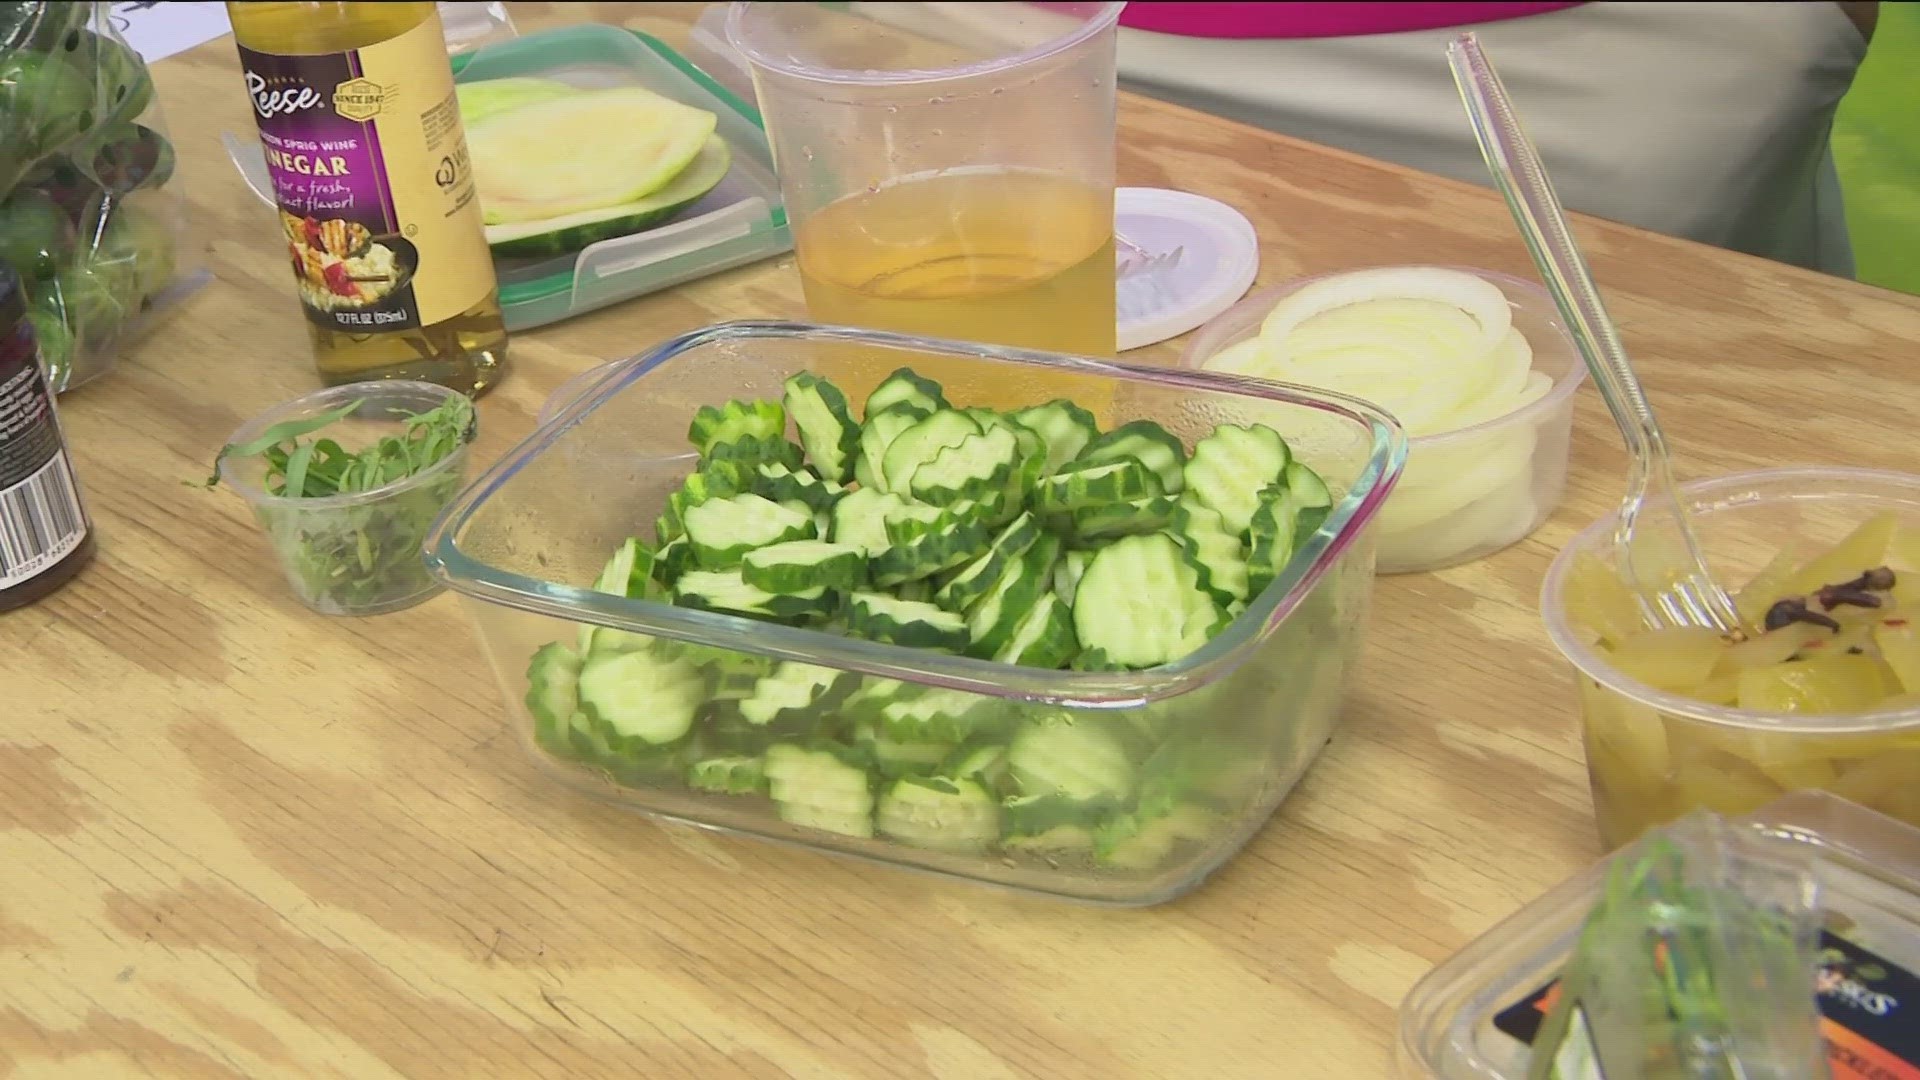 Pickles have been a hit at the State Fair. Here's how to make your own.